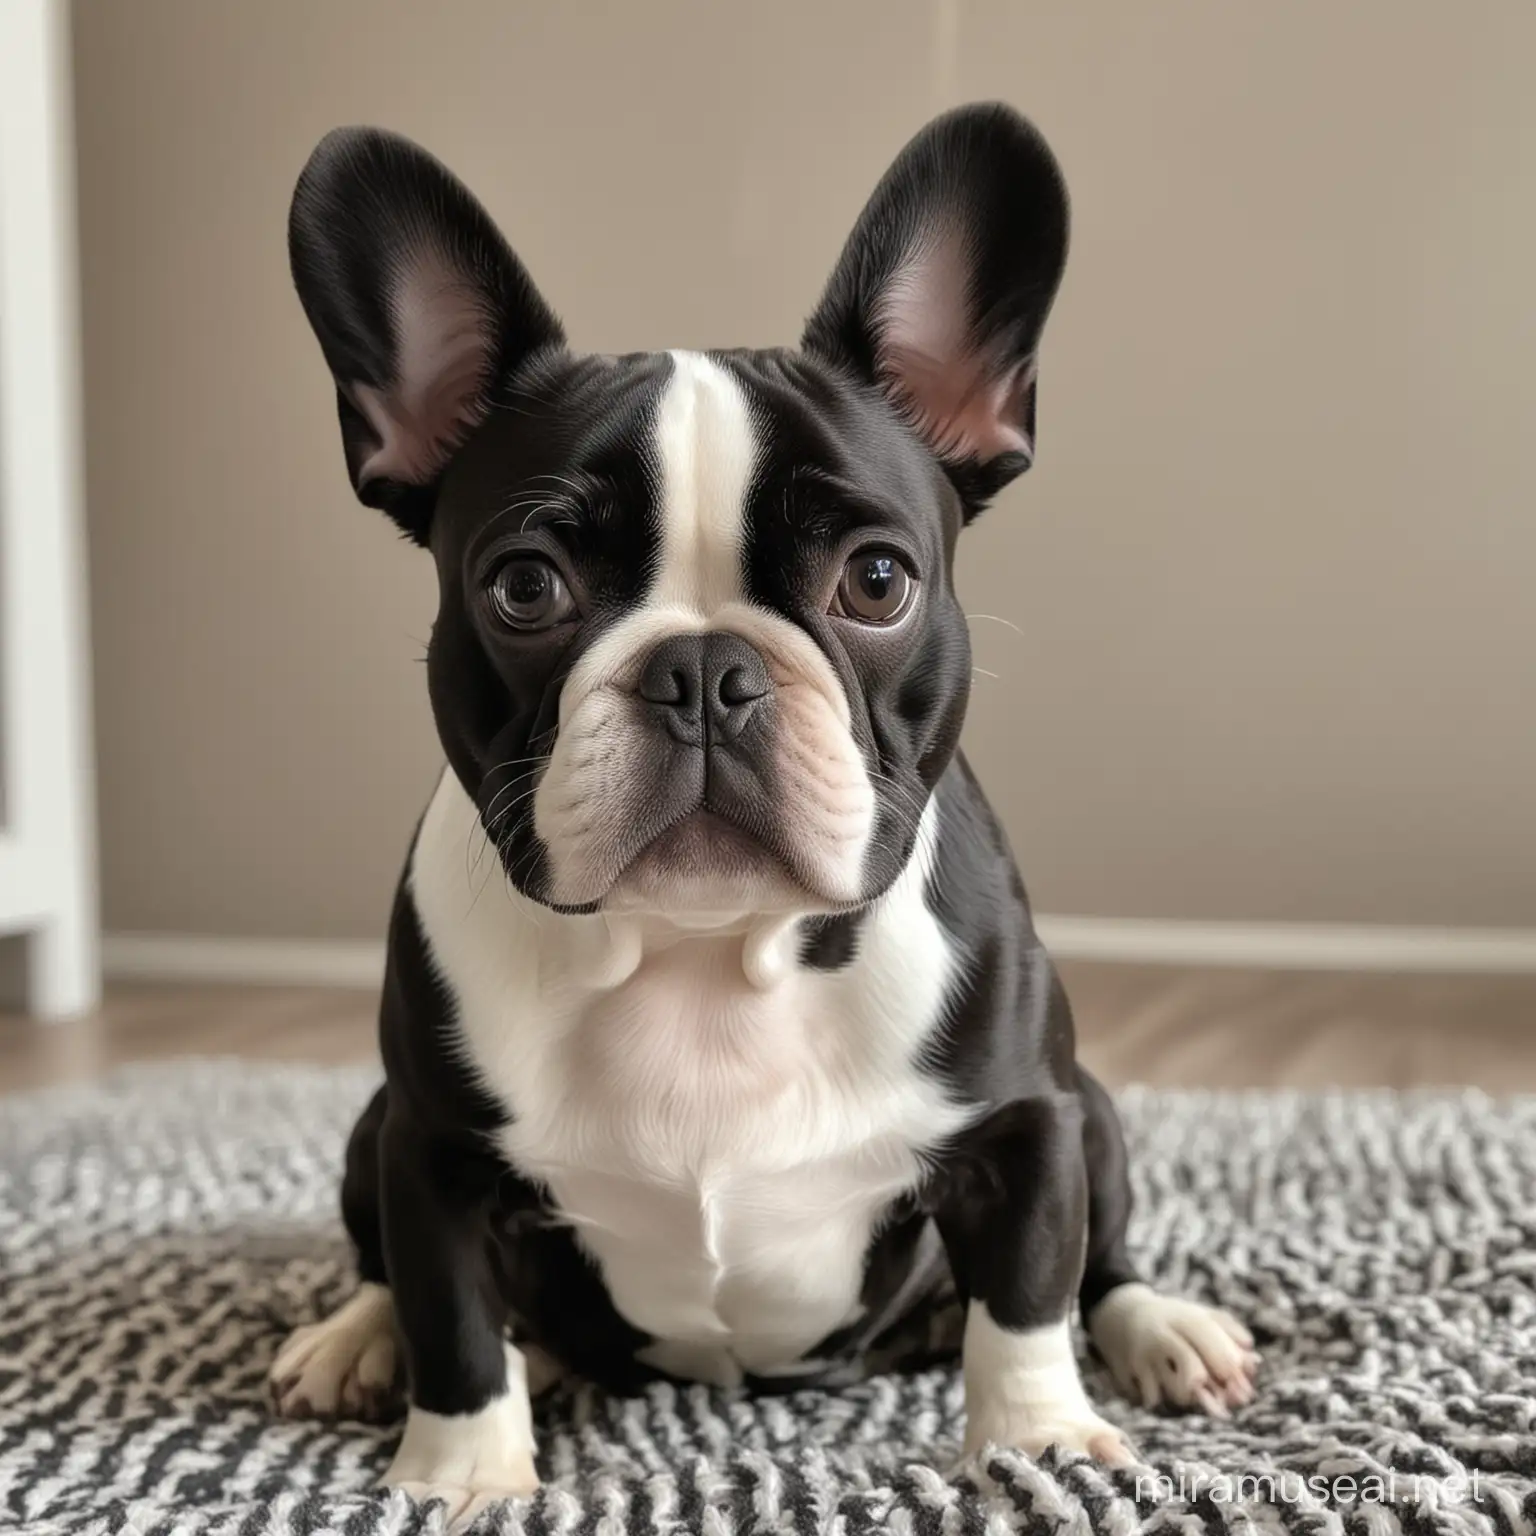 happy, confident, friendly, adorable, black and white French bulldog